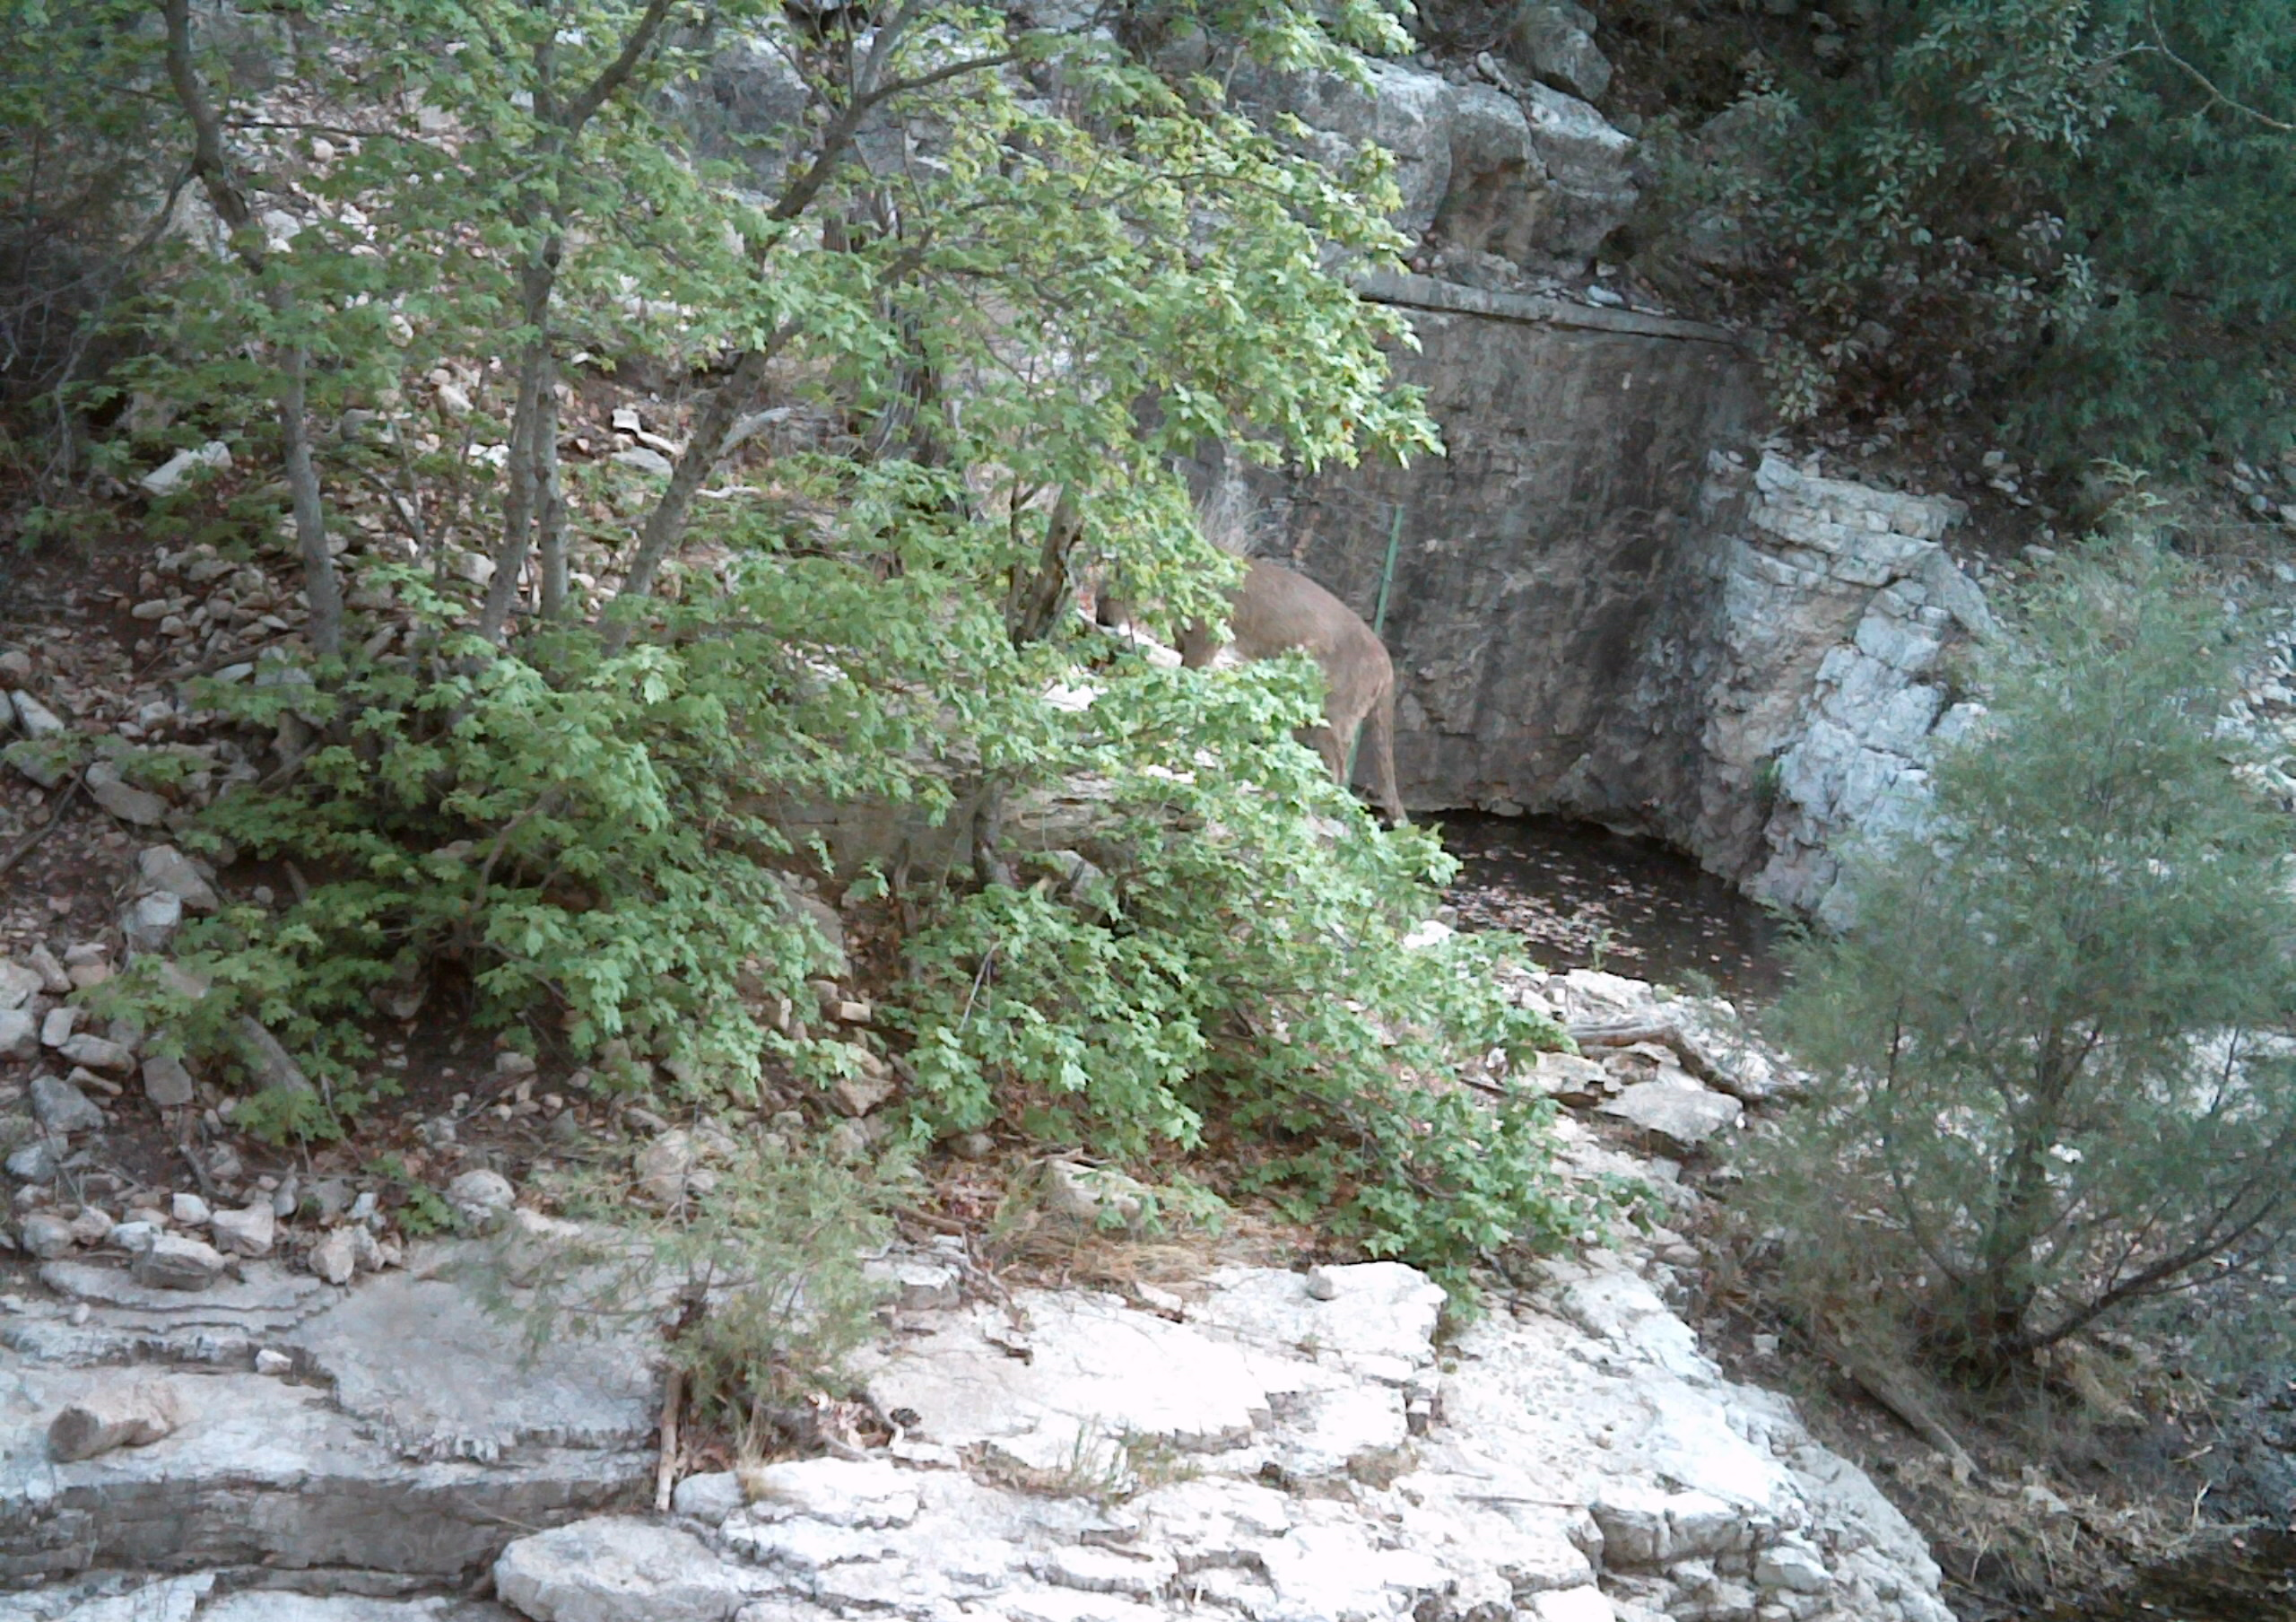 A mountain lion is obscured by trees and vegetation